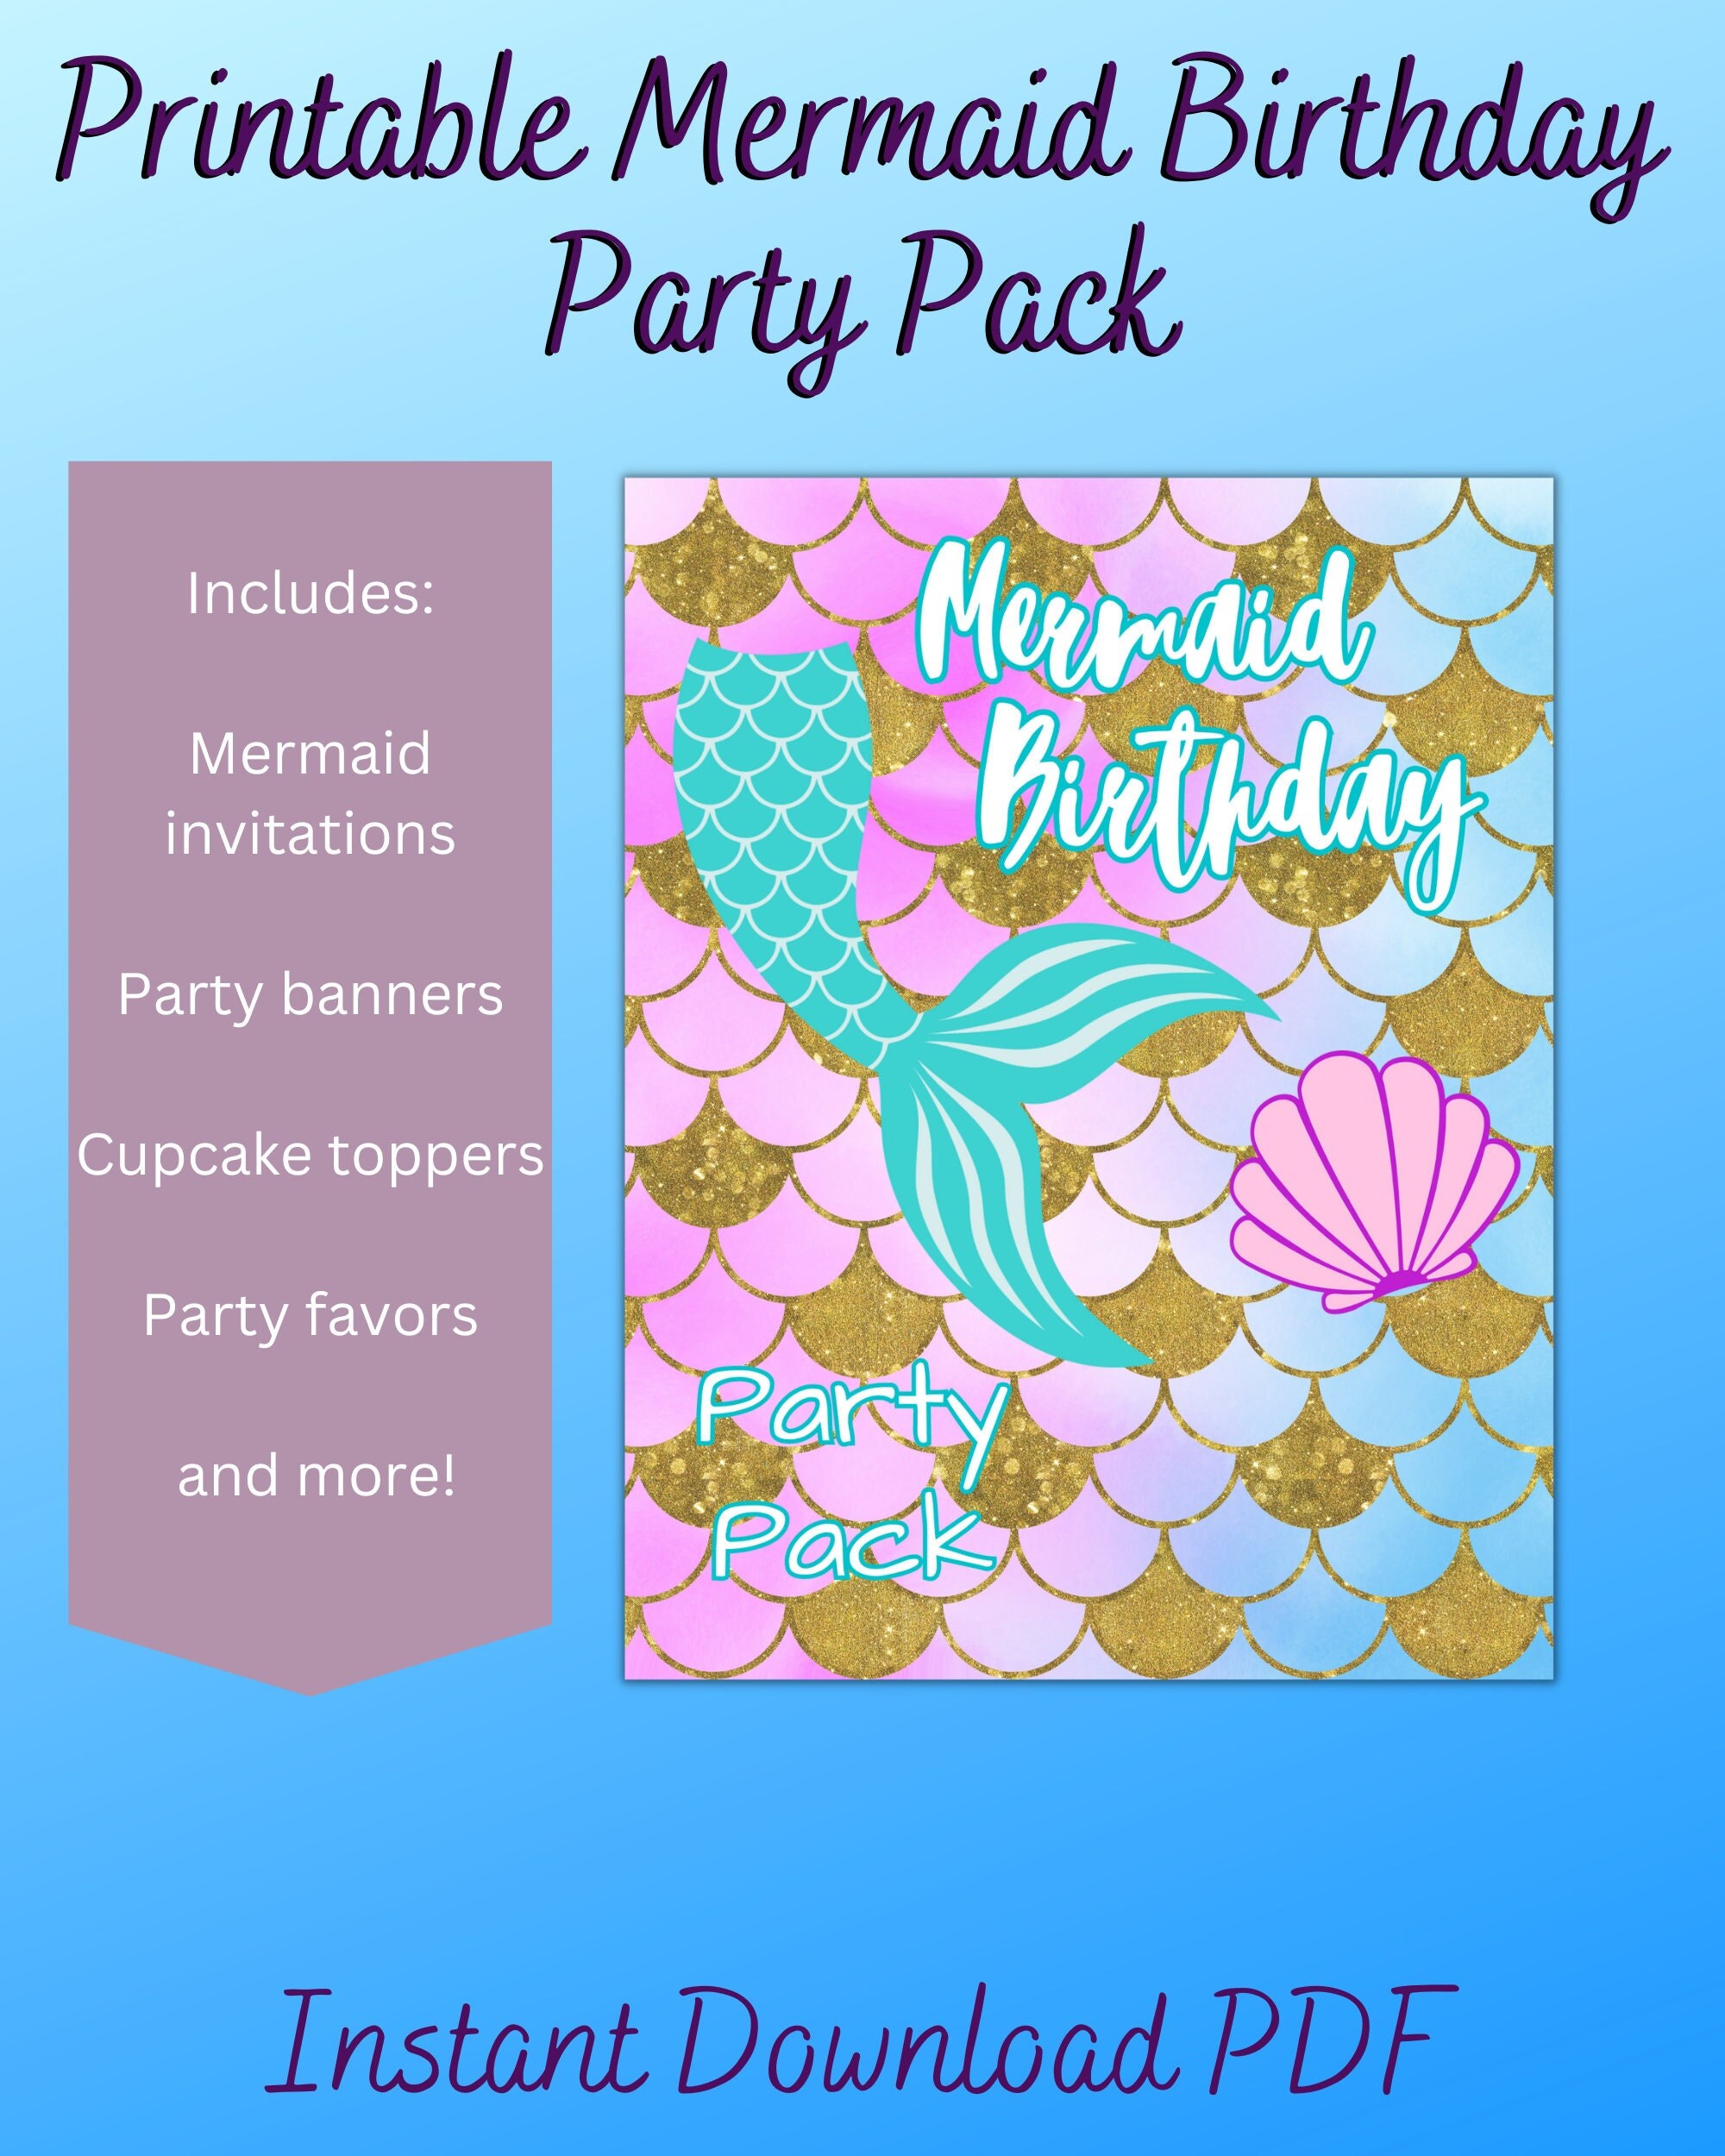 Printable Mermaid Birthday Party Pack DIY Party Supplies for Under the Sea  Fun Instant Download PDF/JPG 